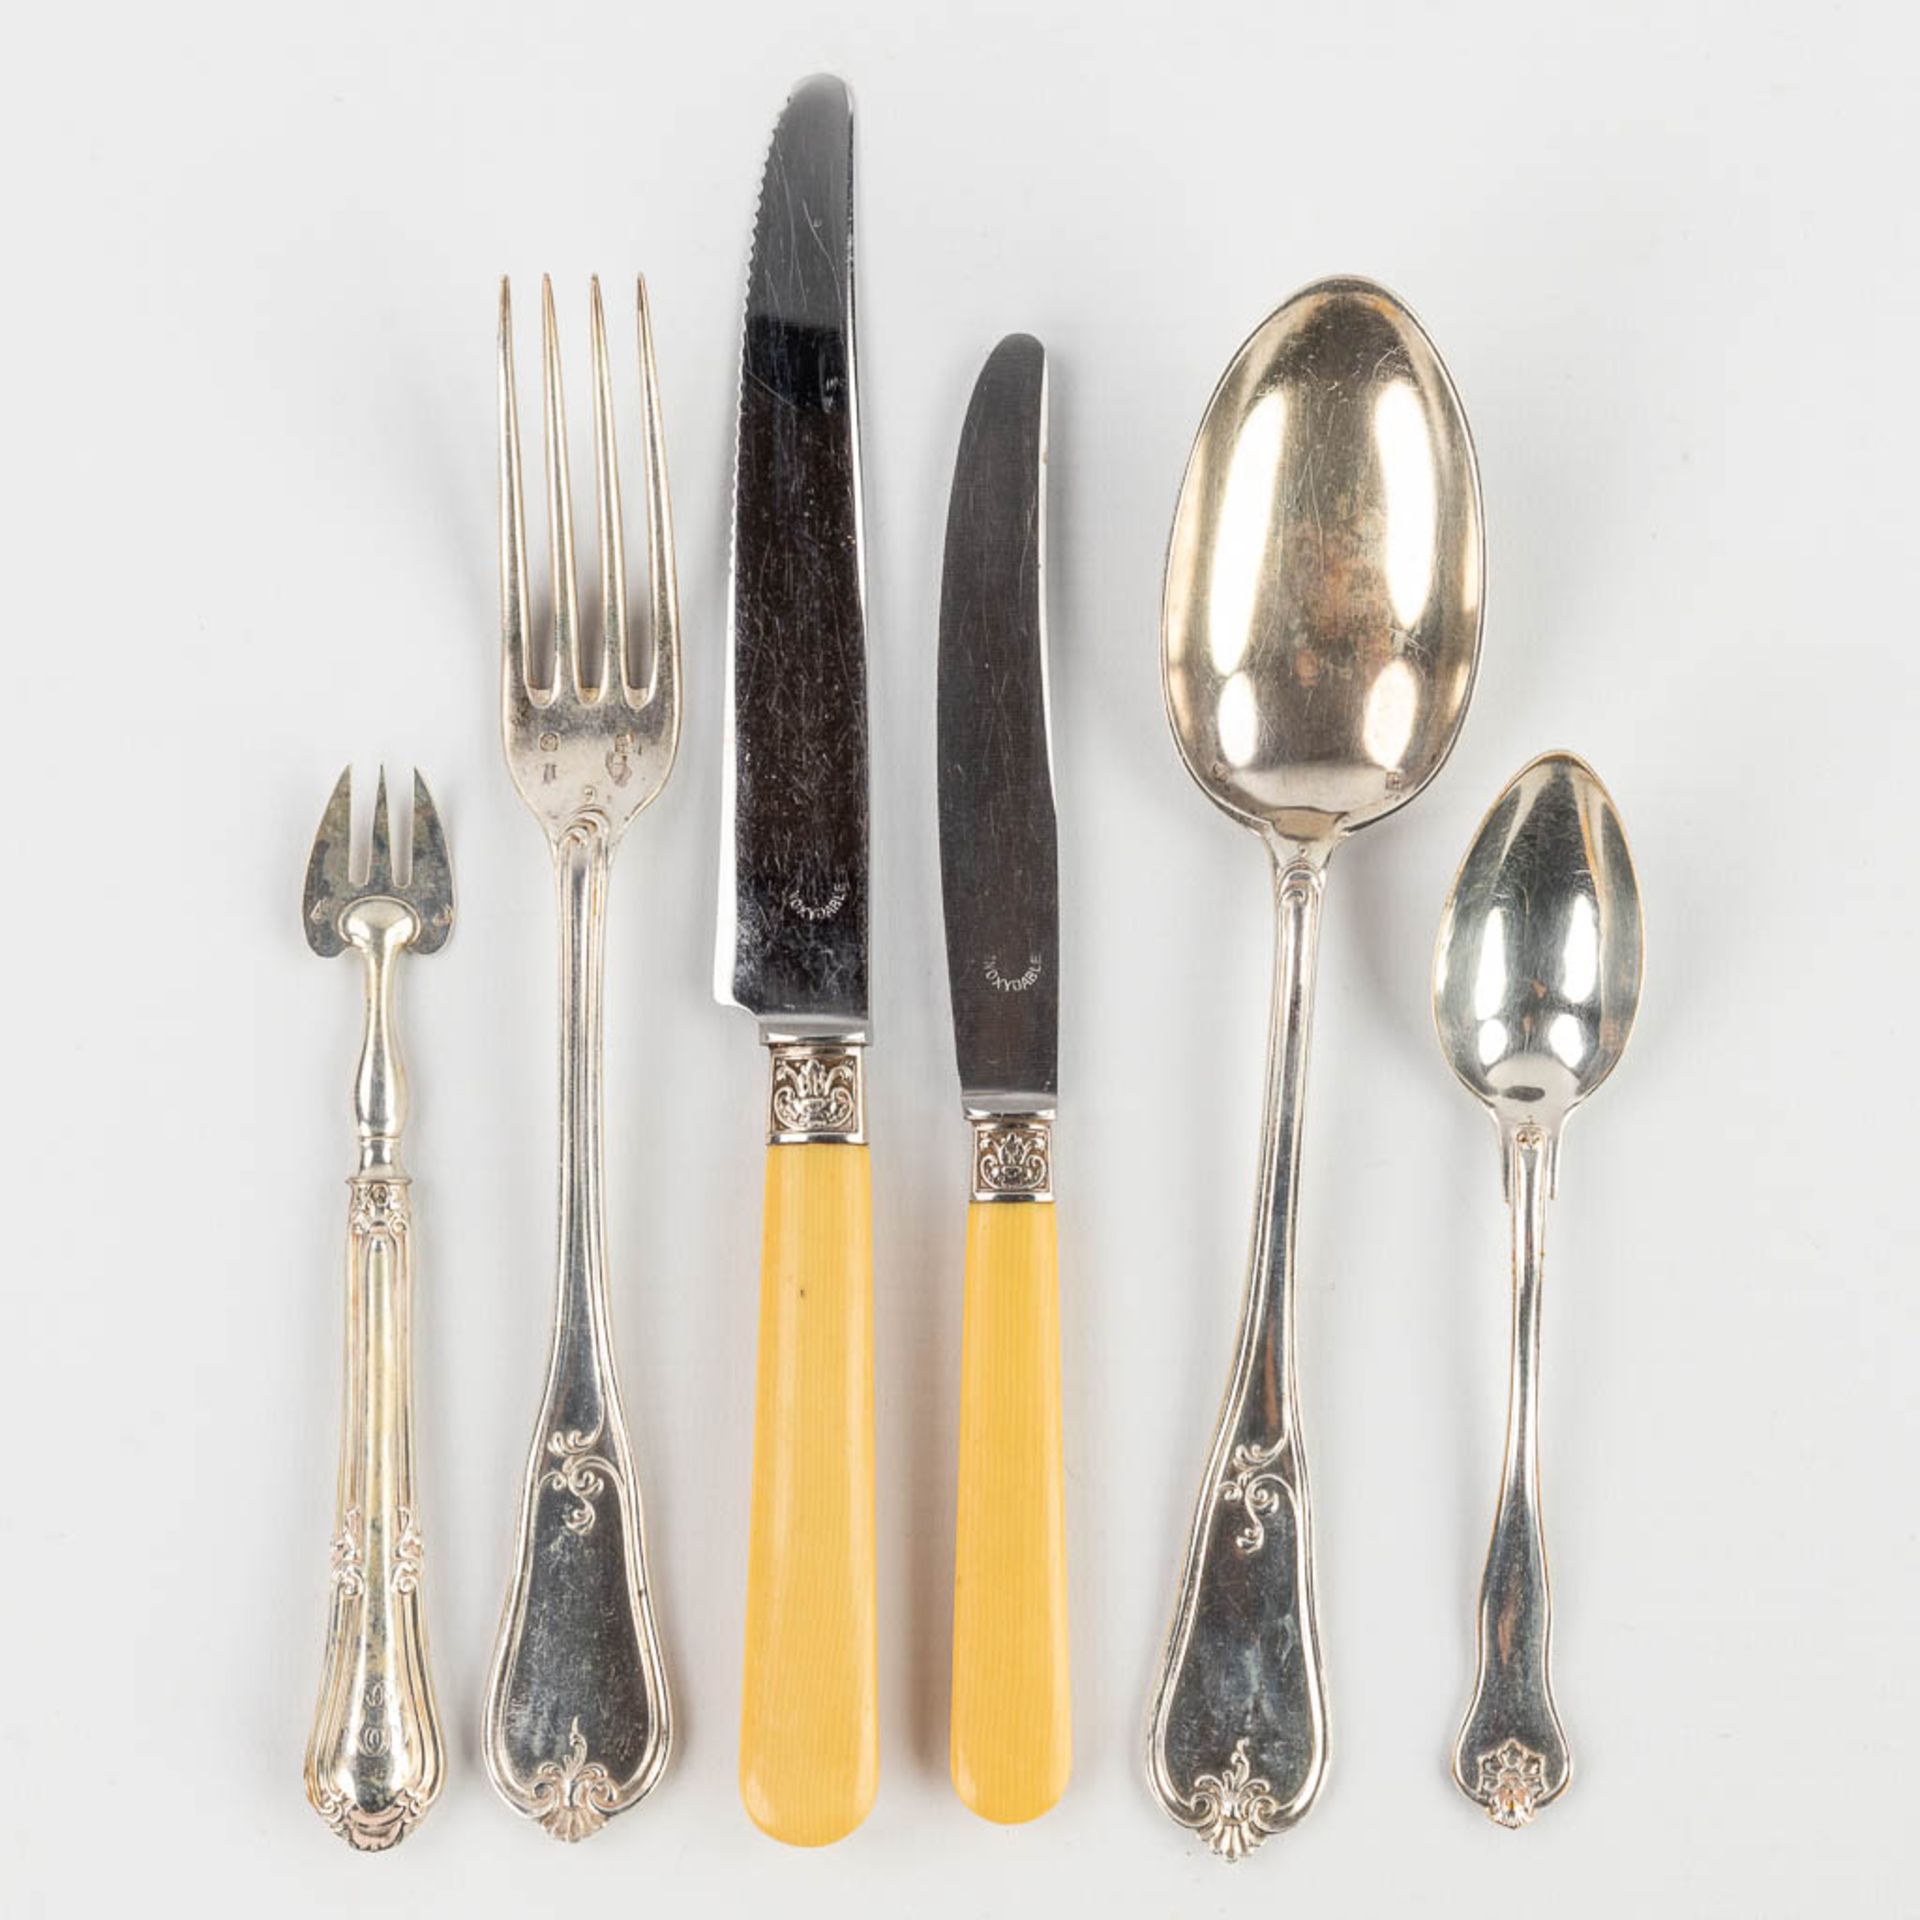 An assembled collection of silver and silver-plated cutlery in 6 storage boxes. - Image 23 of 25